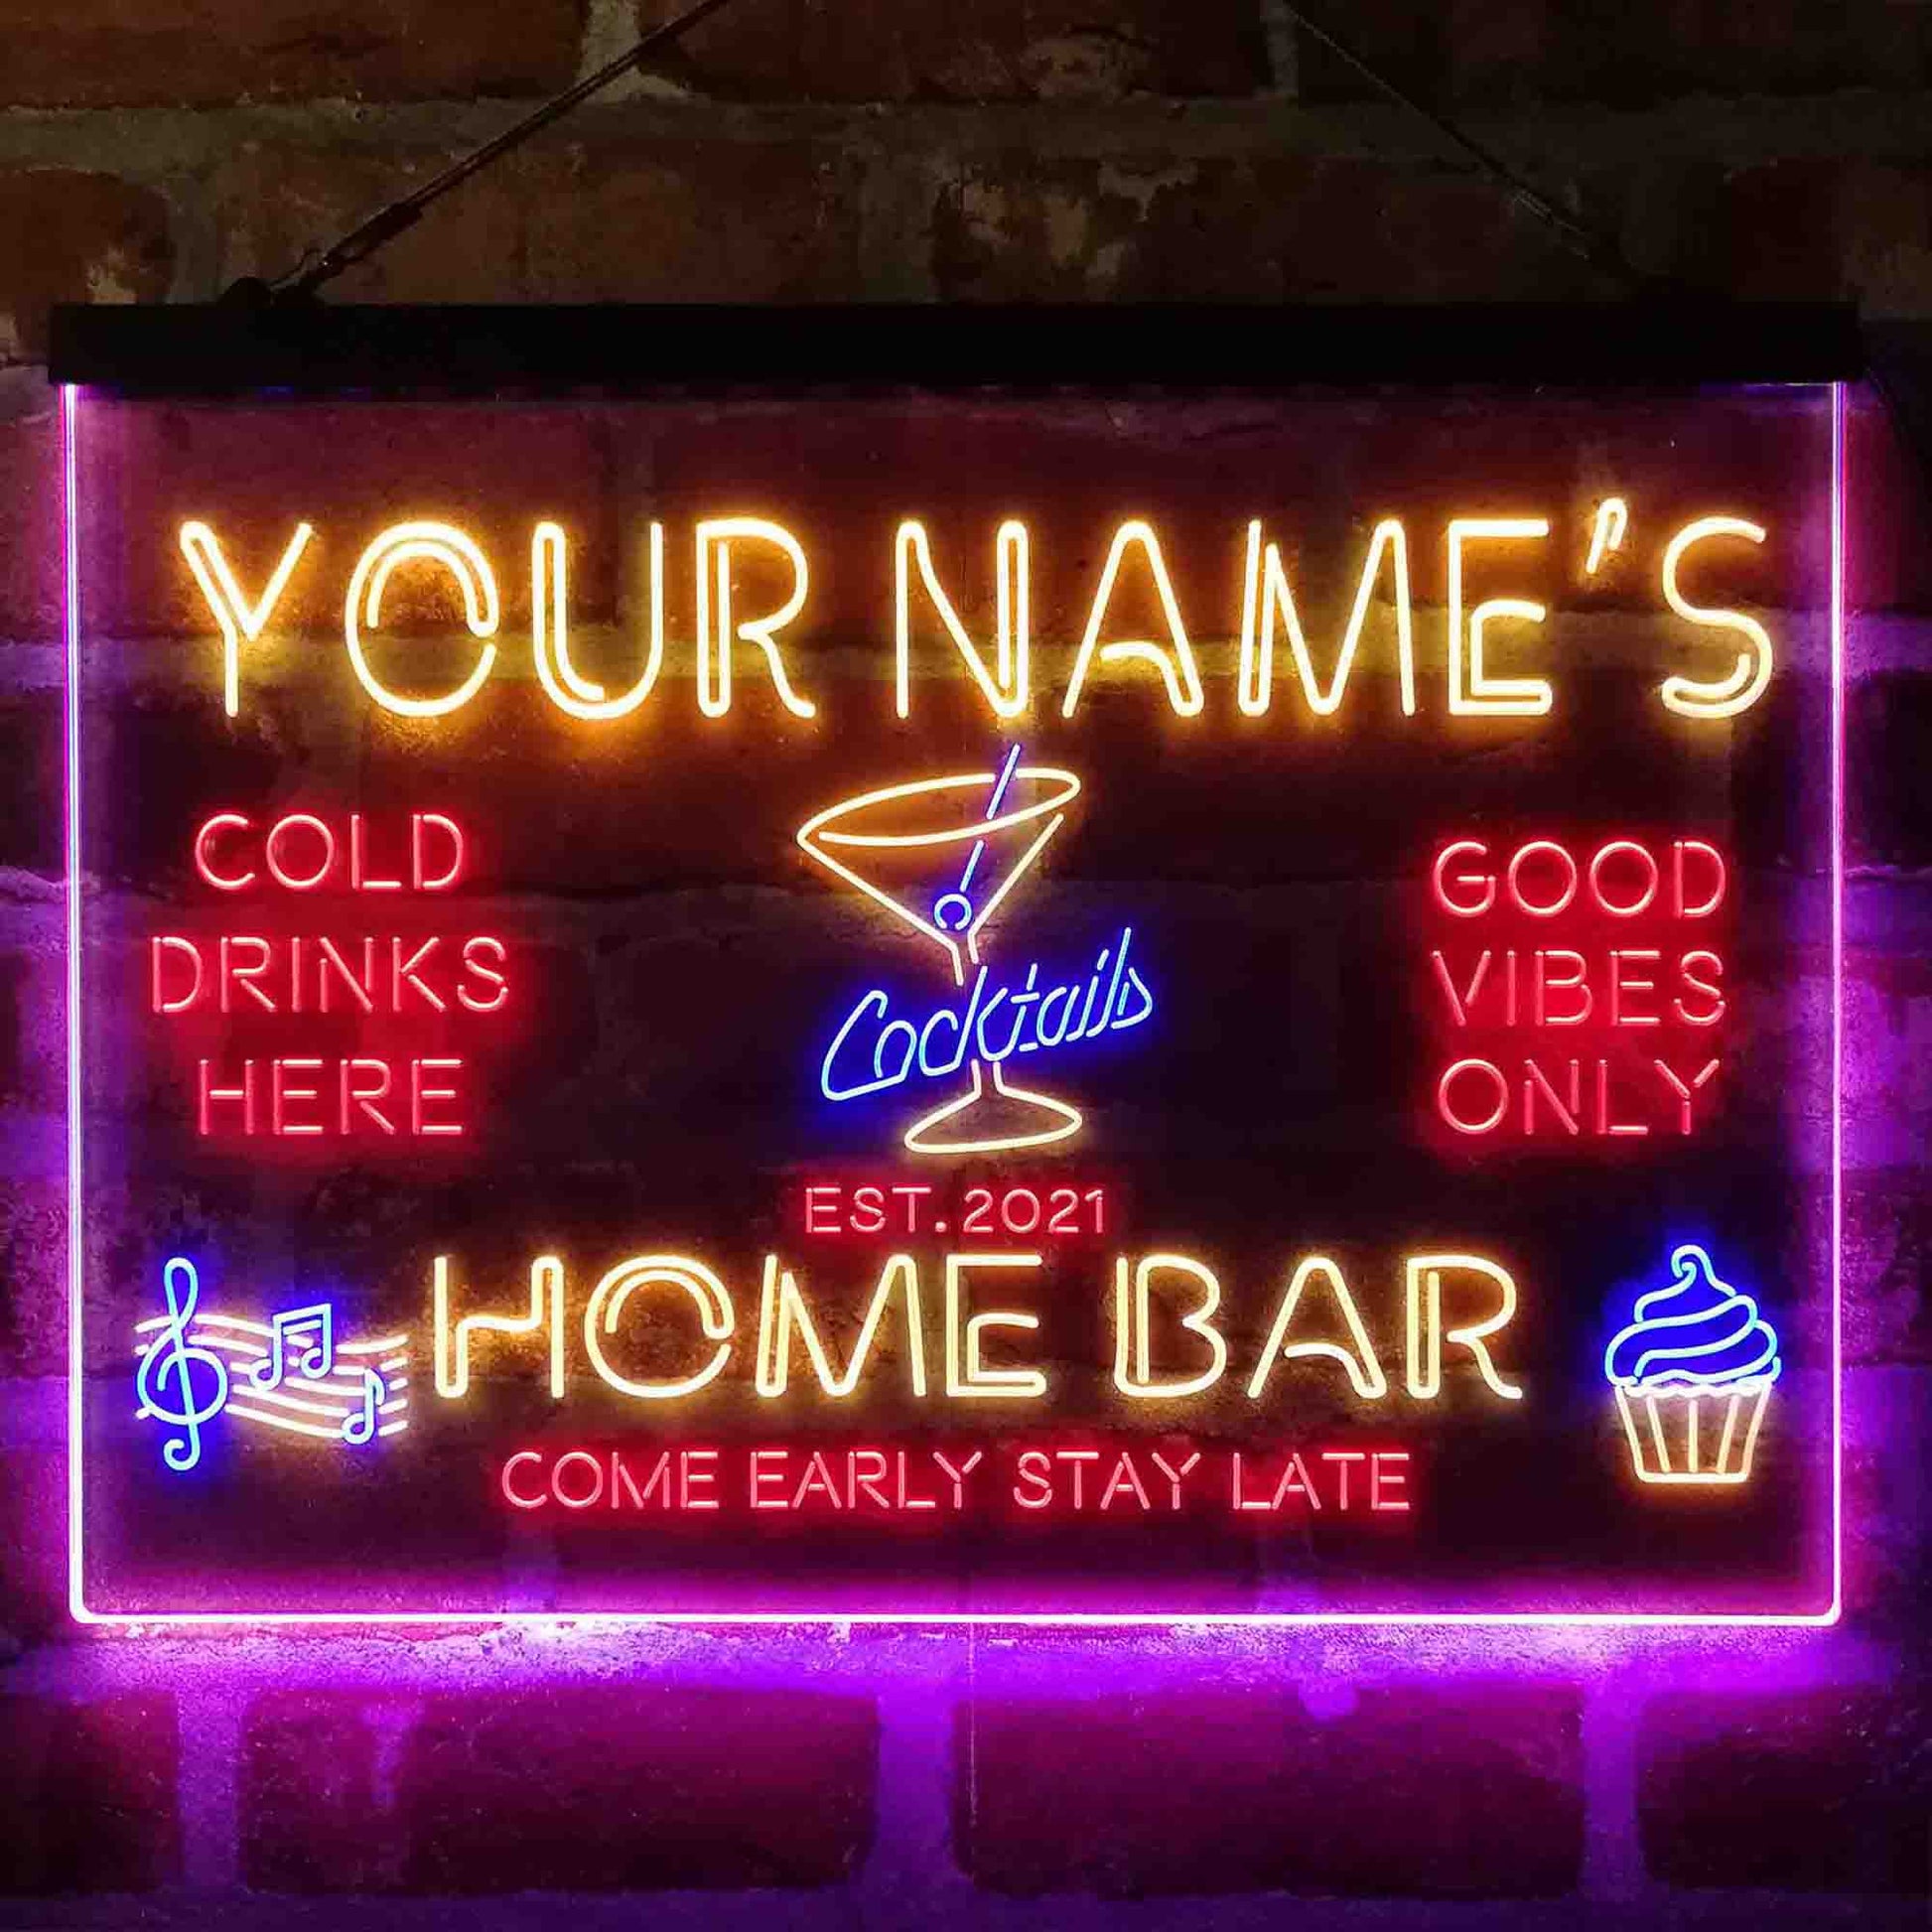 Custom Neon Signs, LED Neon Signs, Personalized Neon